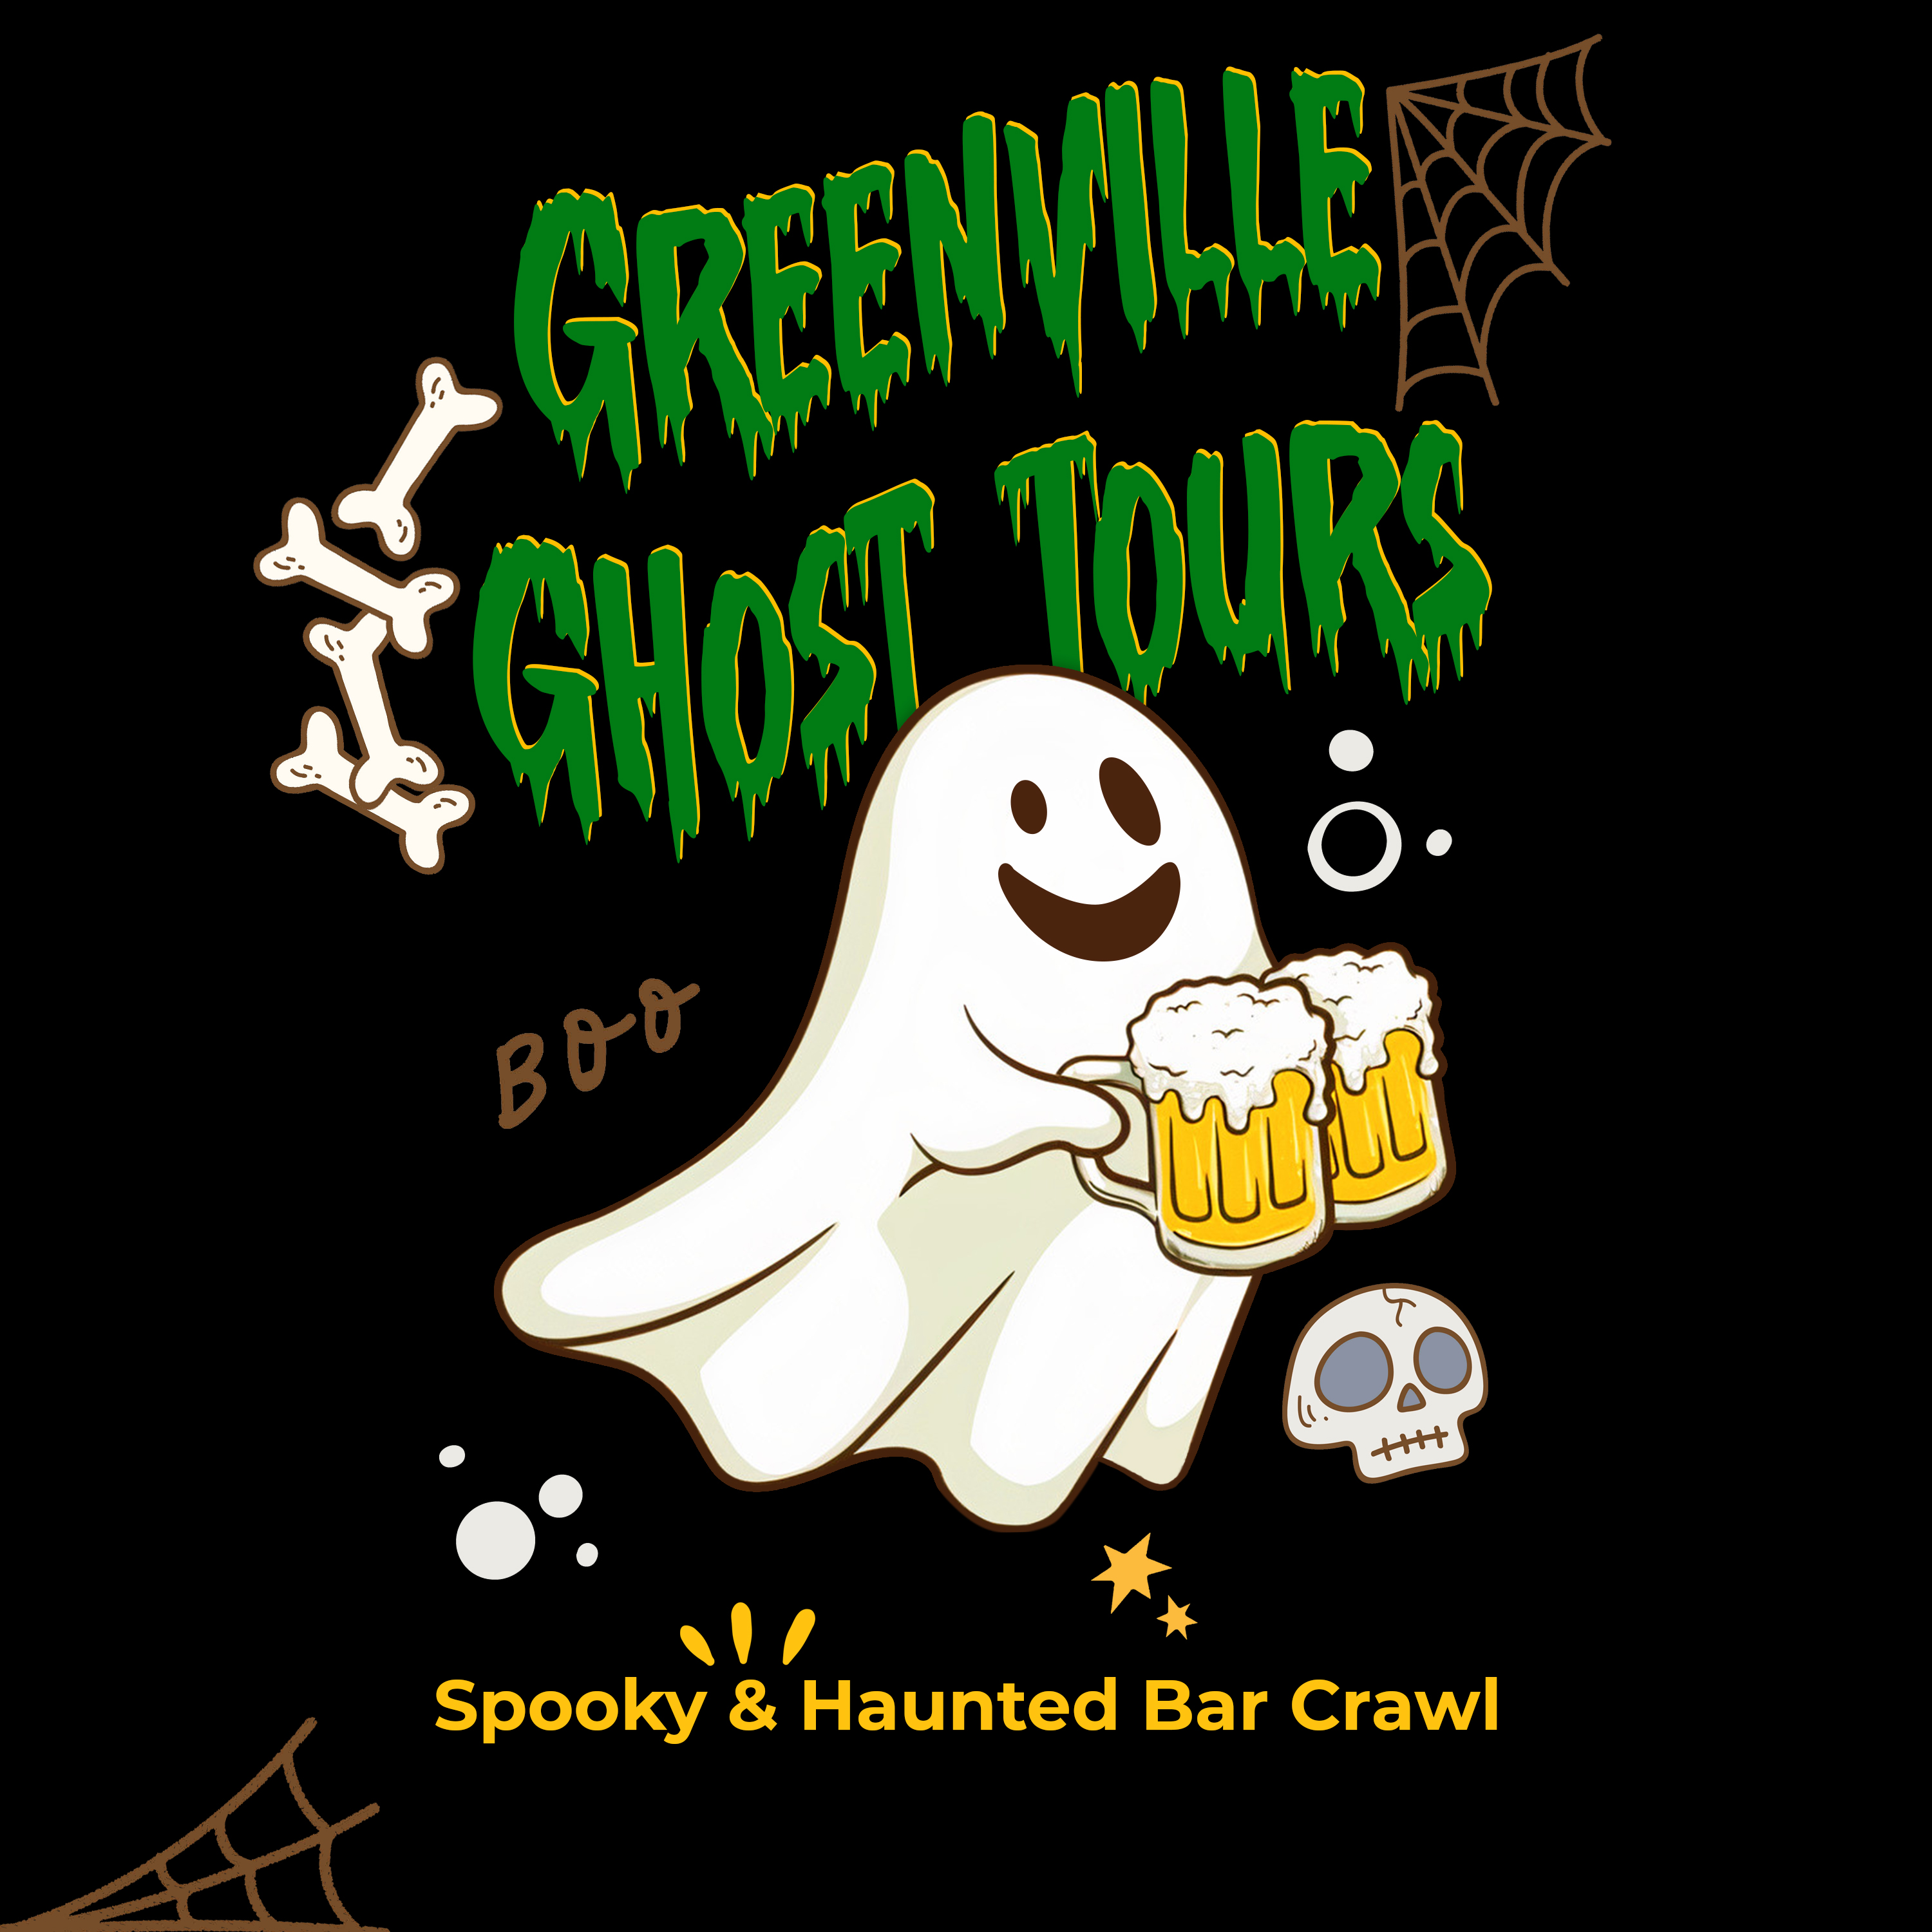 Six Haunted Attractions - Greenville on the Rise